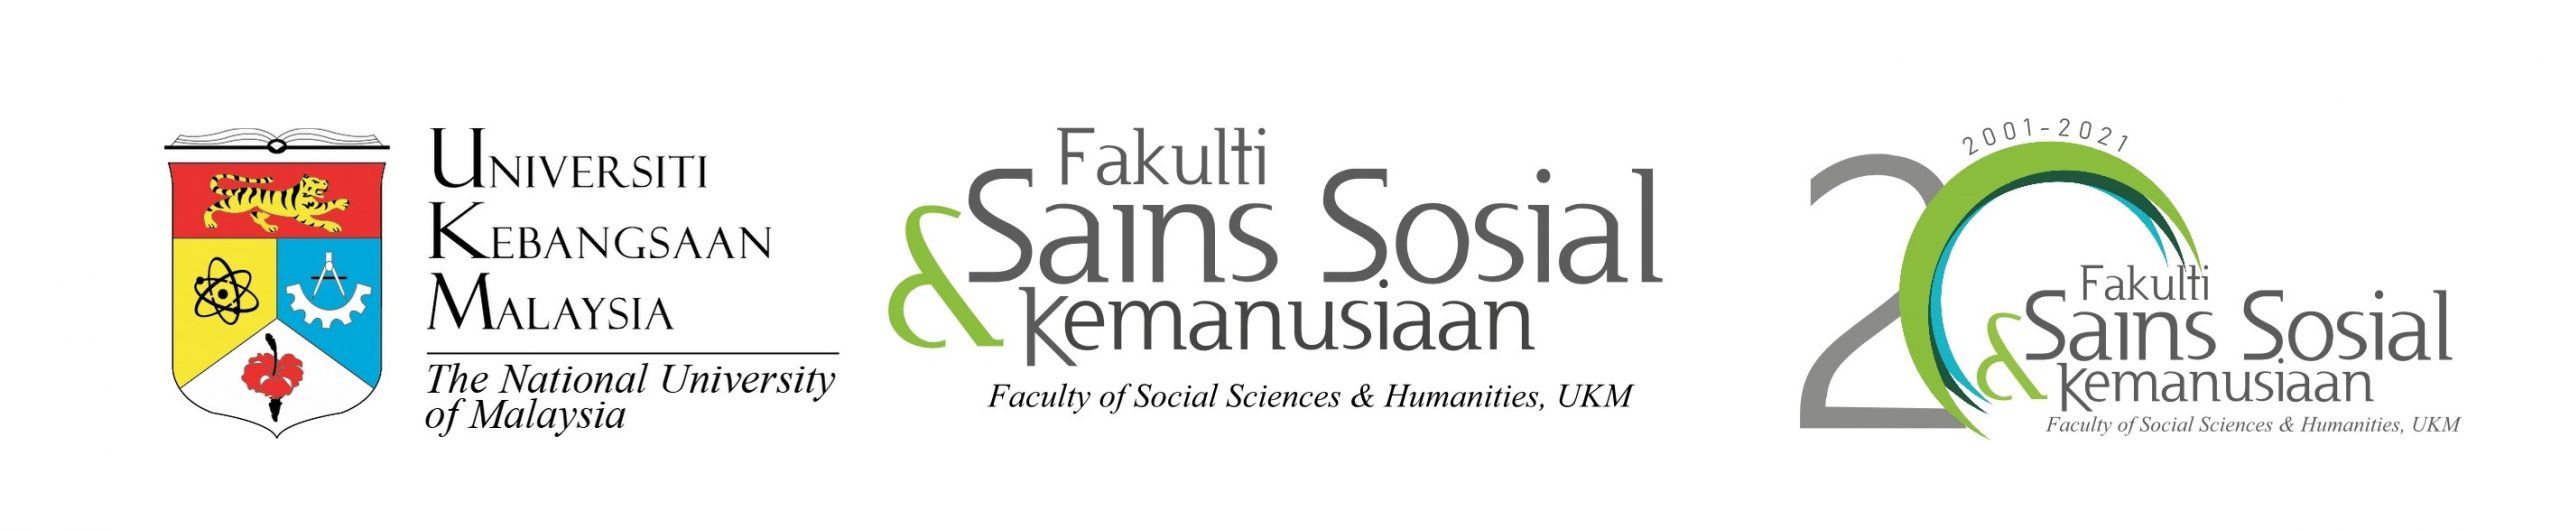 Faculty of Social Sciences and Humanities